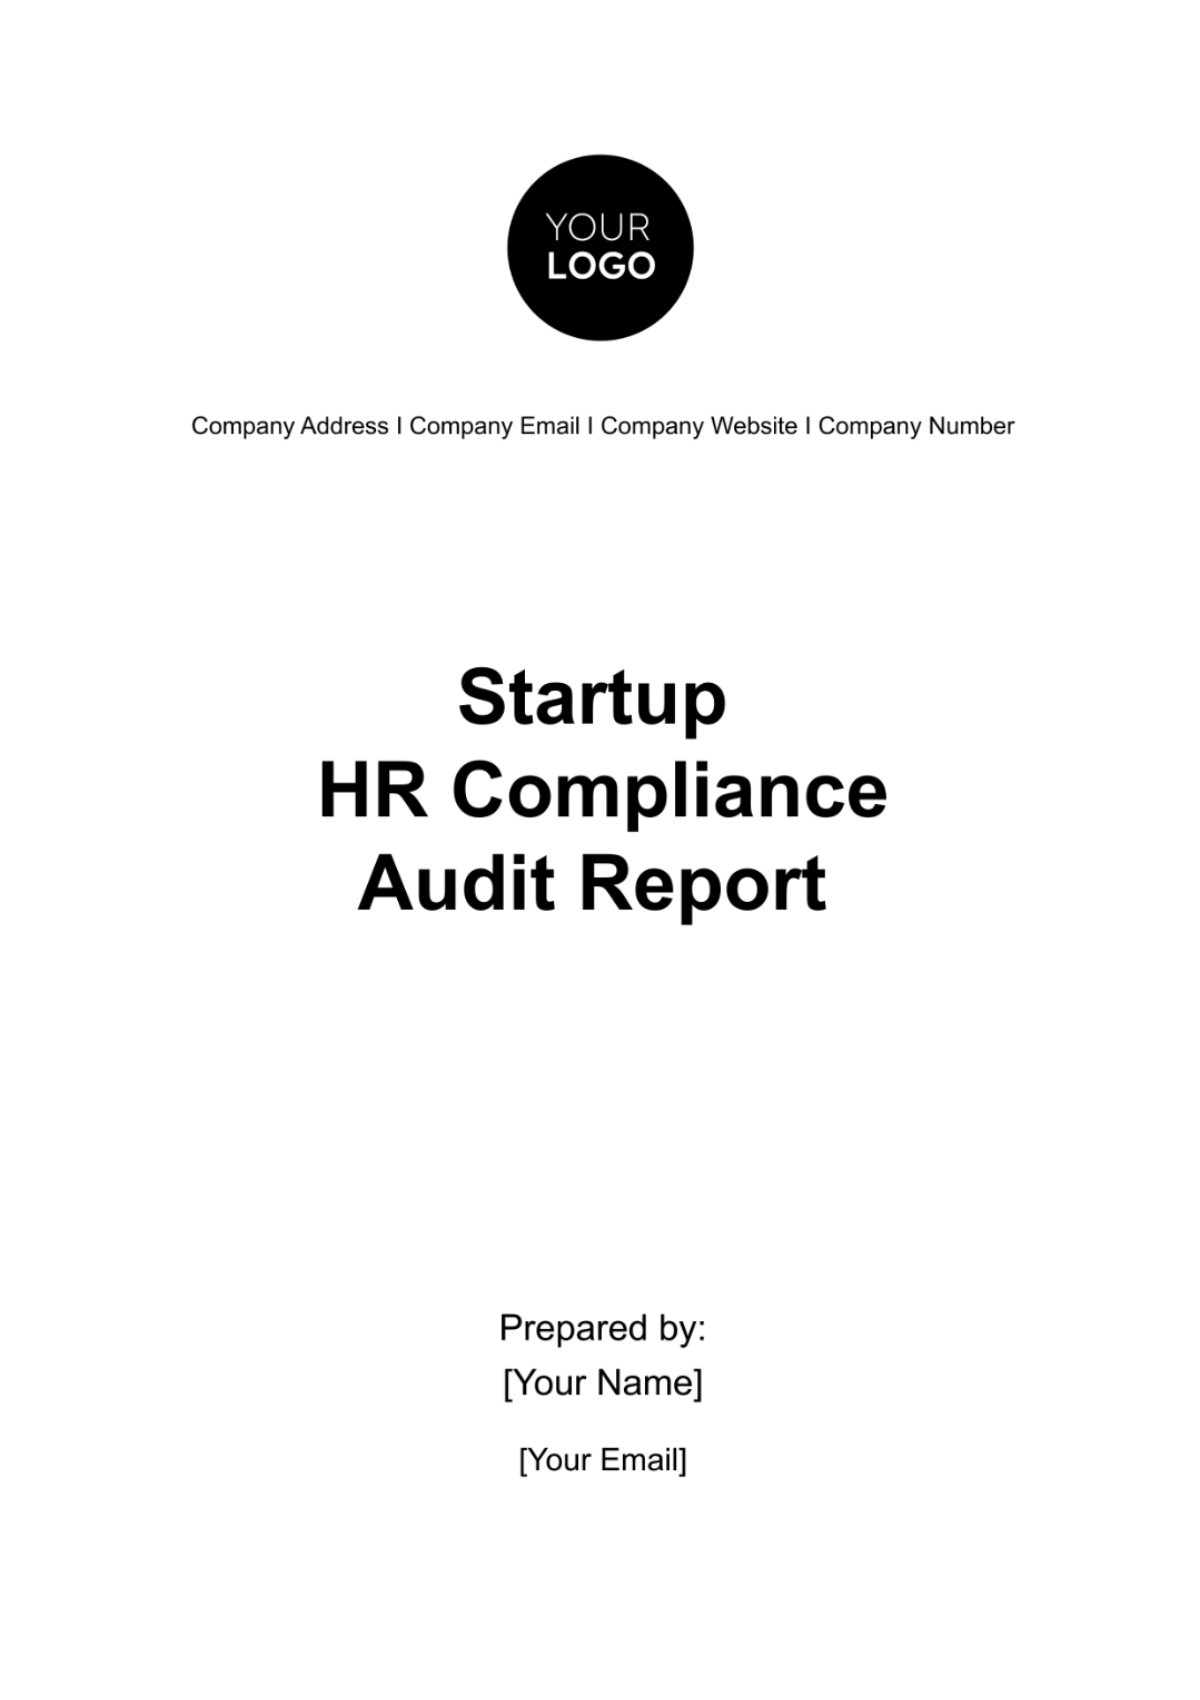 Free Startup HR Compliance Audit Report Template